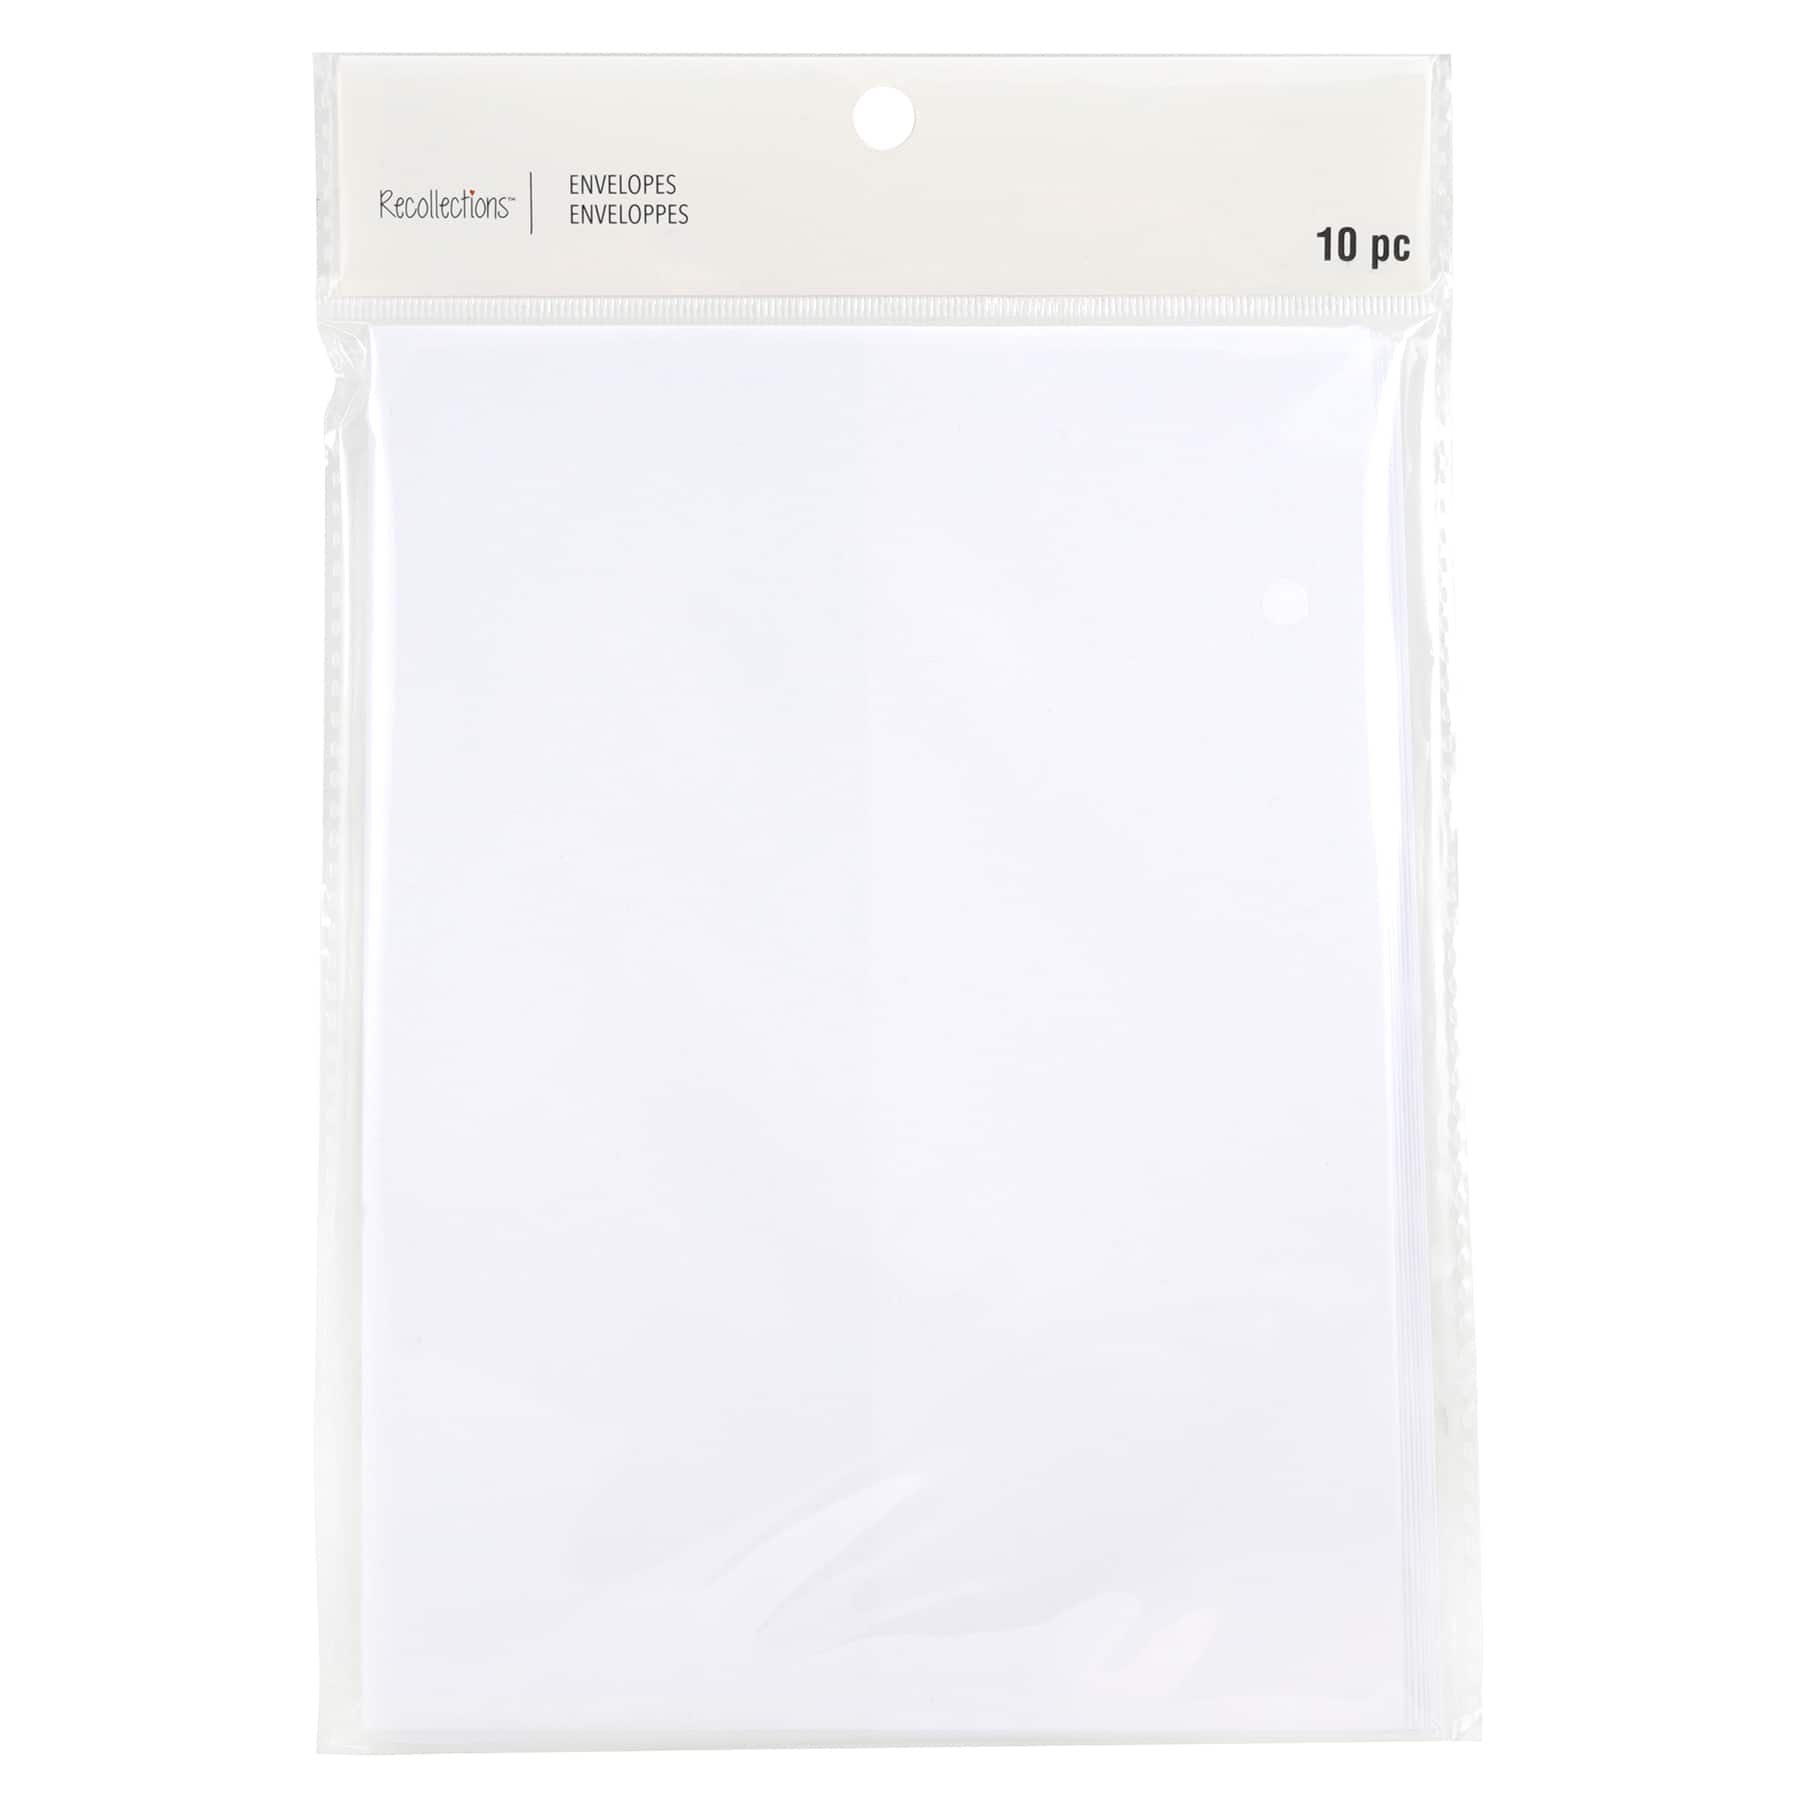 Plastic Business Envelope with Zip Lock Closure. Business Envelopes,  Printed Envelopes & Blank Envelopes at Low Prices